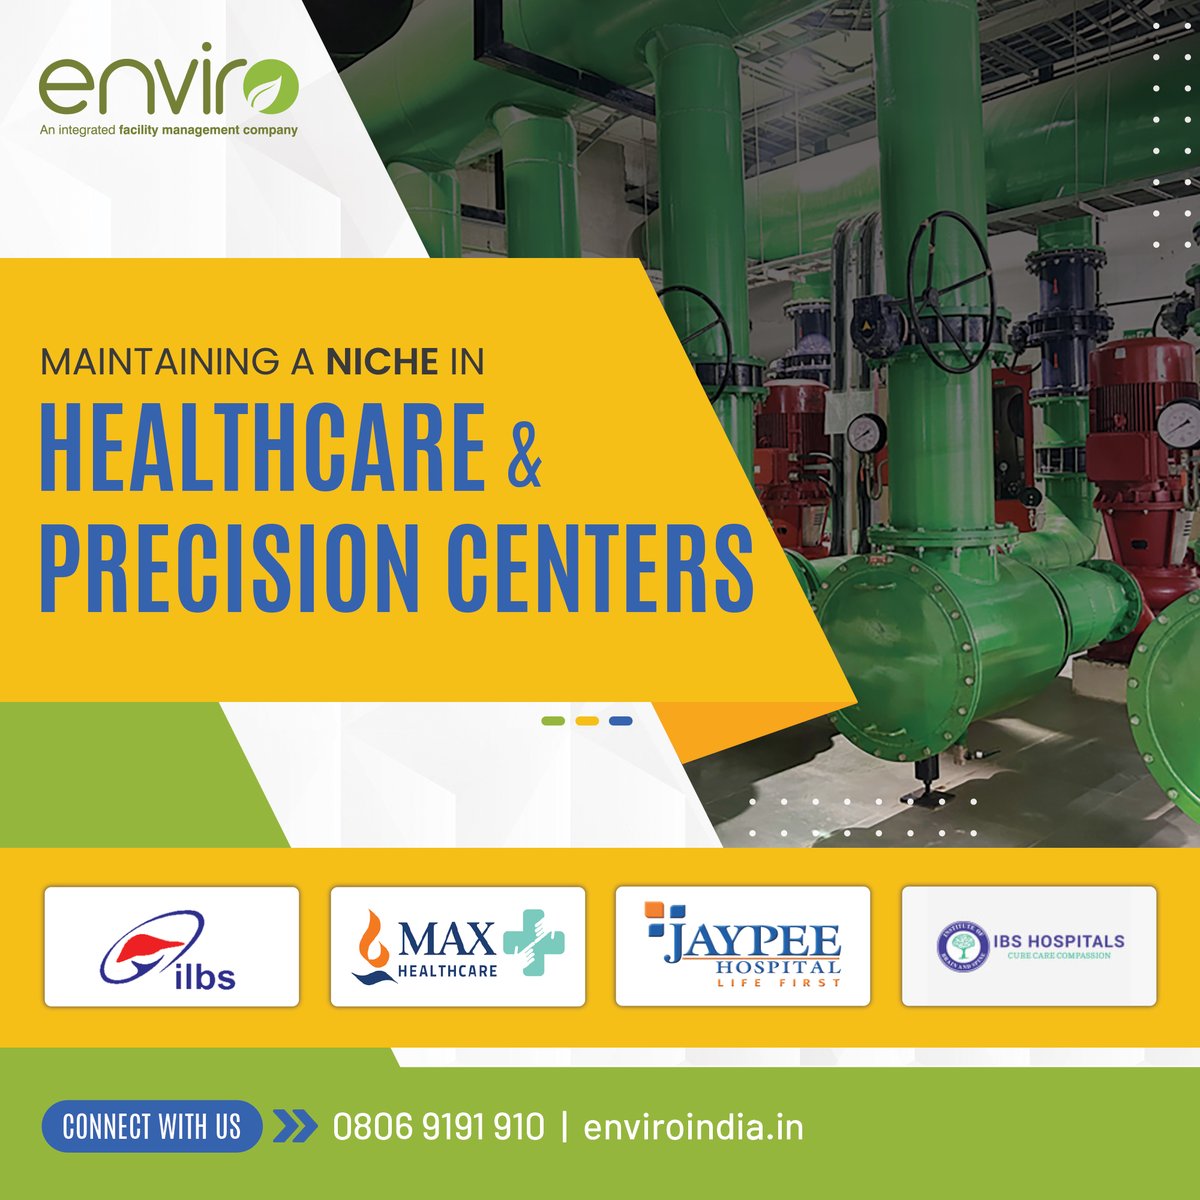 Ensuring #Health with #Excellence: Premier Facility Management for the #HealthcareSector #Client #Clientele #Healthcare #PrecisionCenters #Acknowledge #Enviro #FacilityManagement #IntegratedFacilityManagementServices #IFMS #BuildingMaintenance